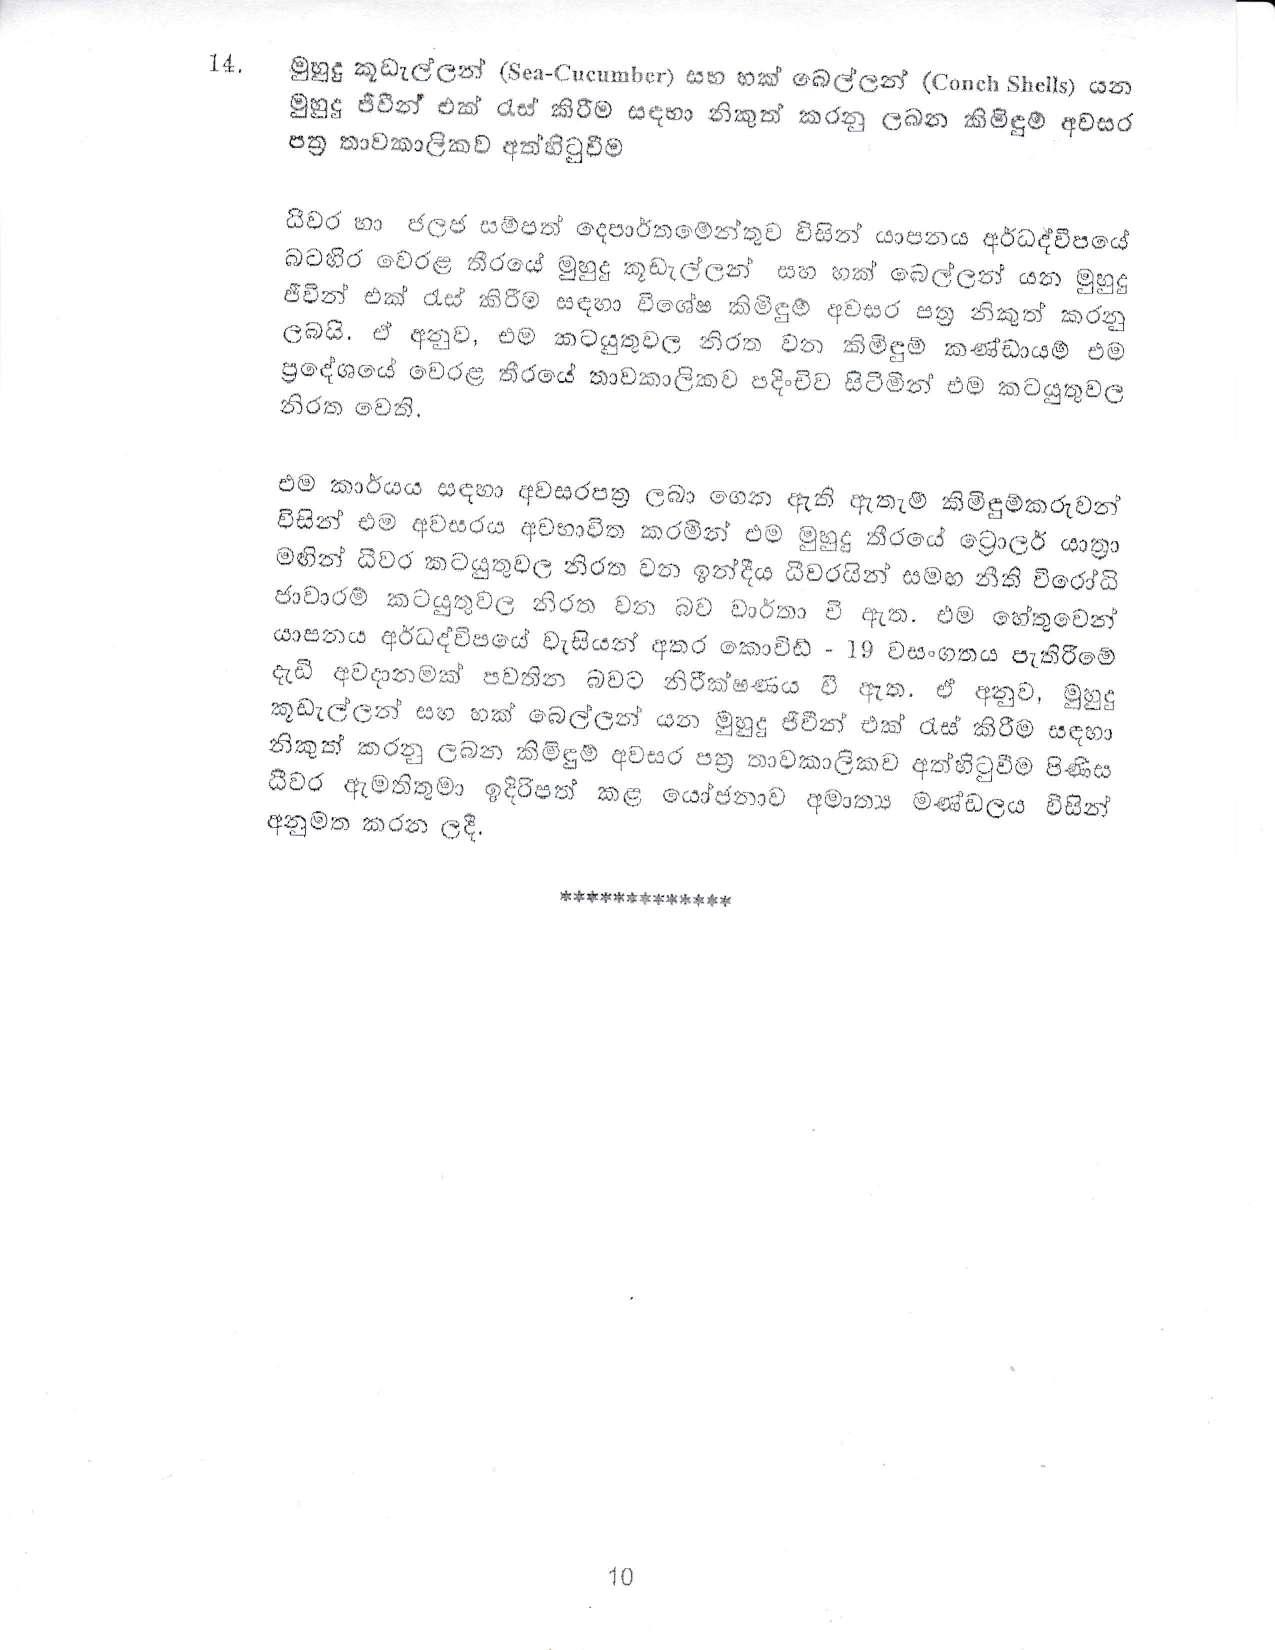 Cabinet Decision on 05.10.2020 compressed page 010